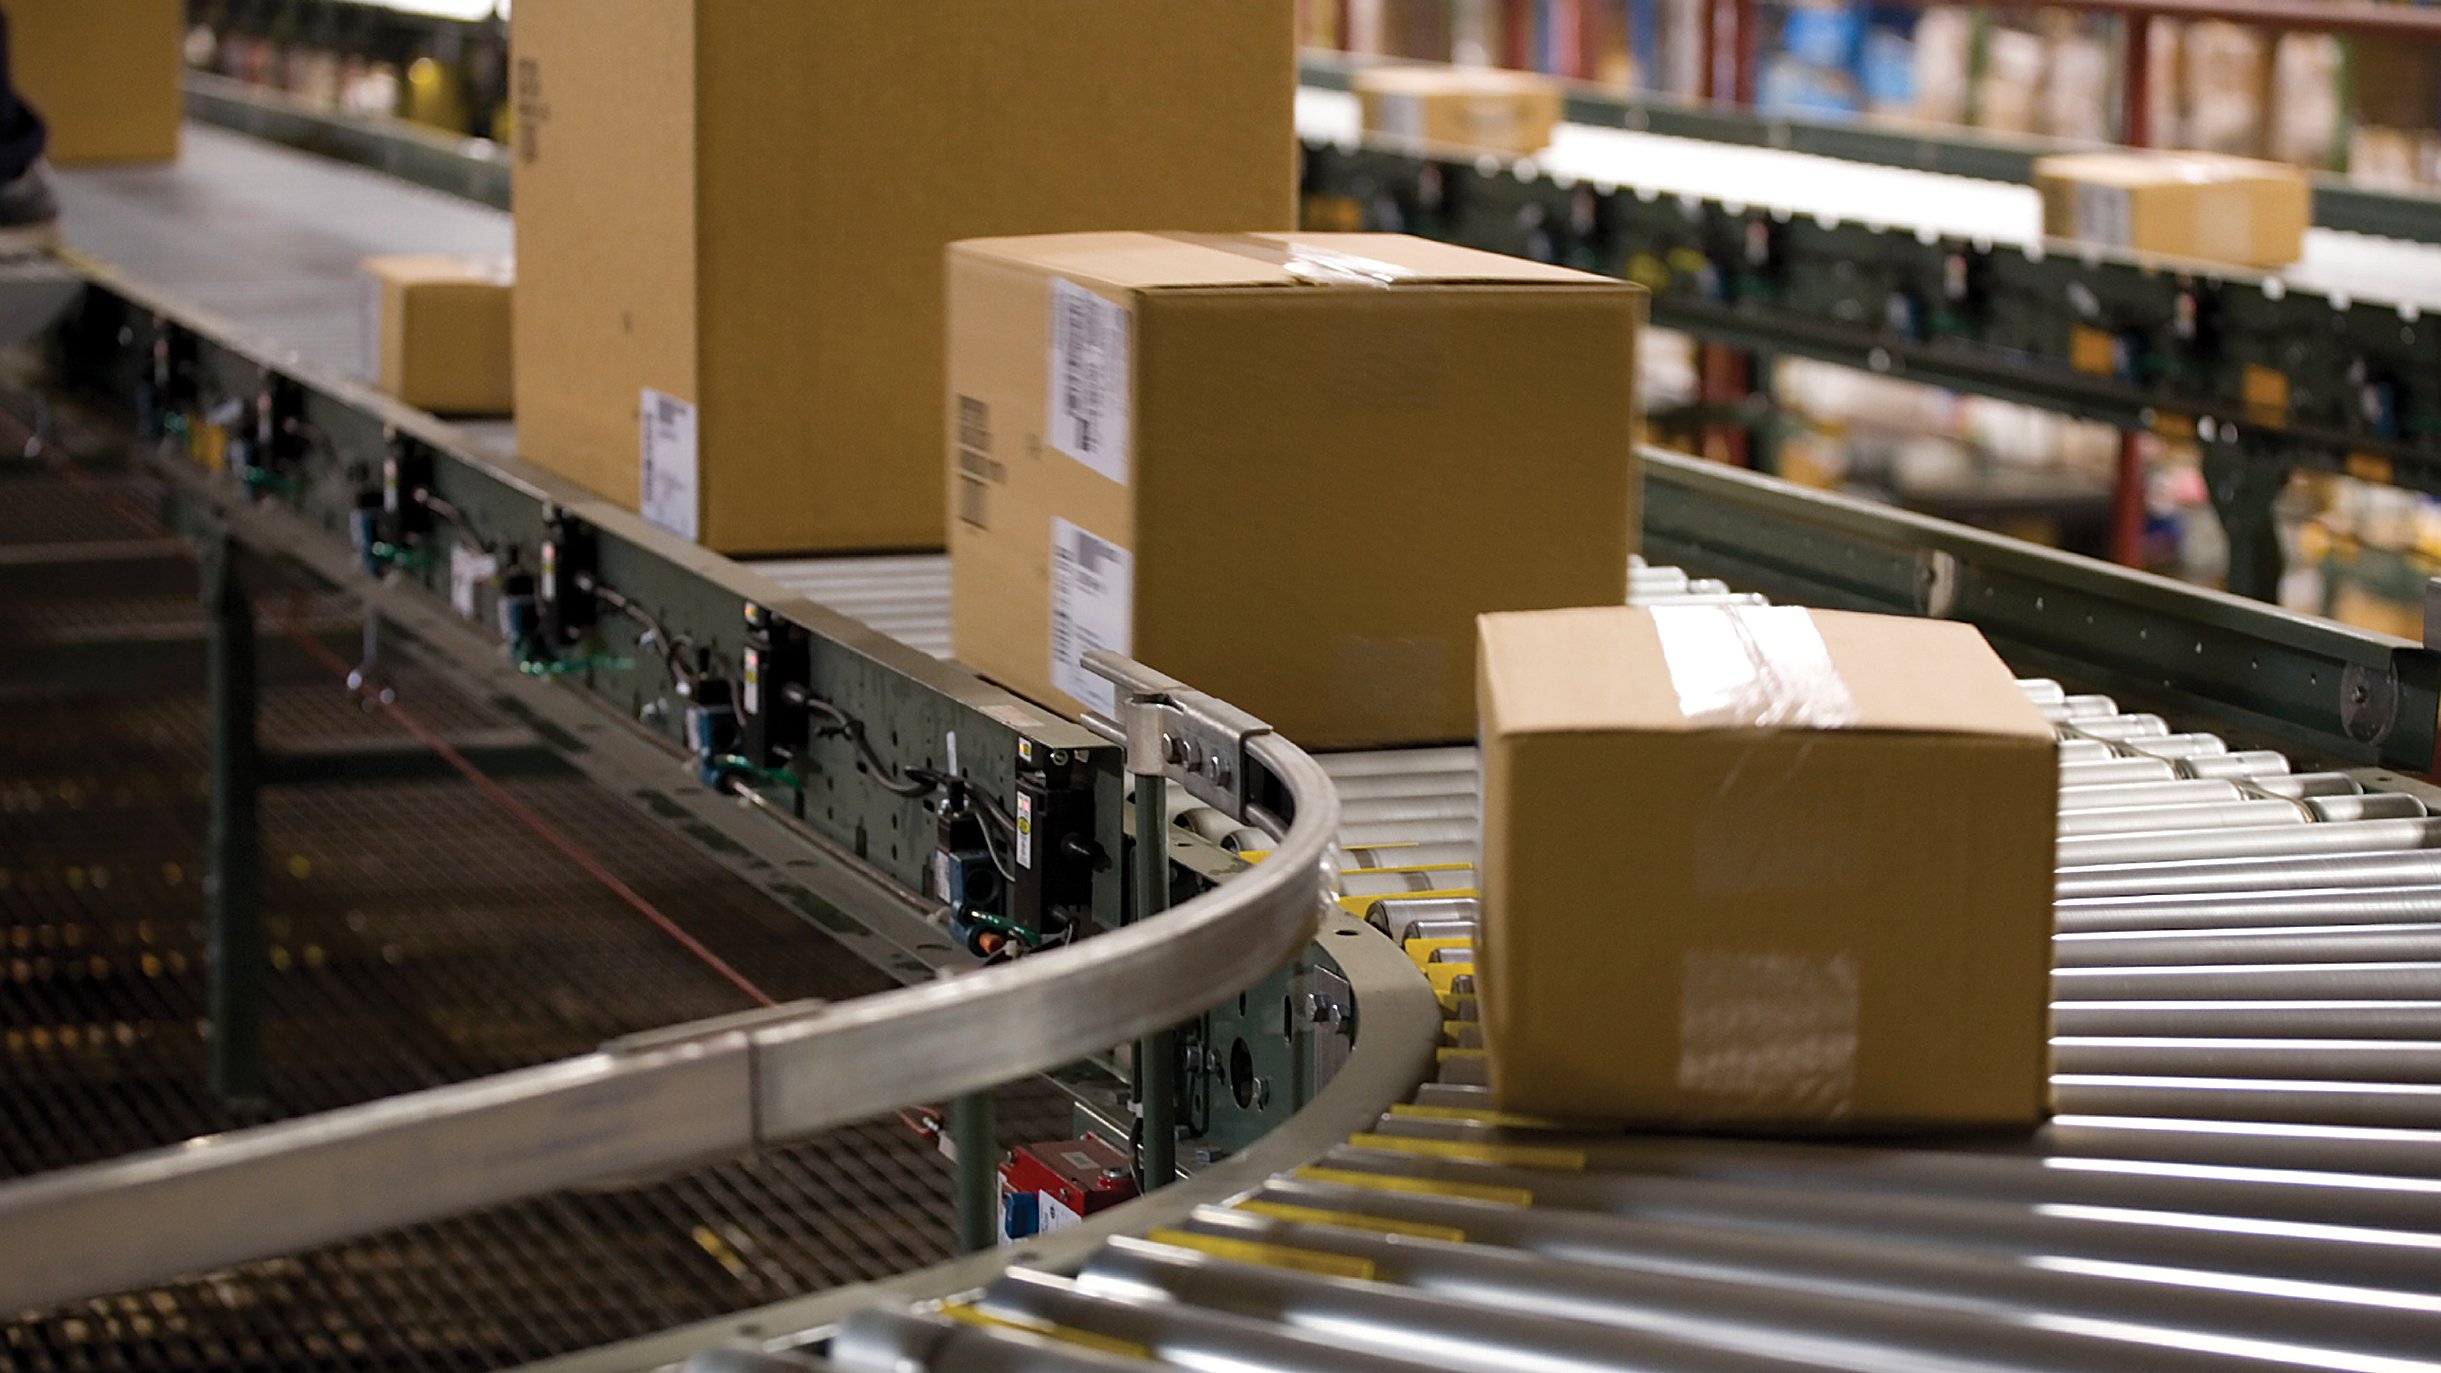 Packages on the production line